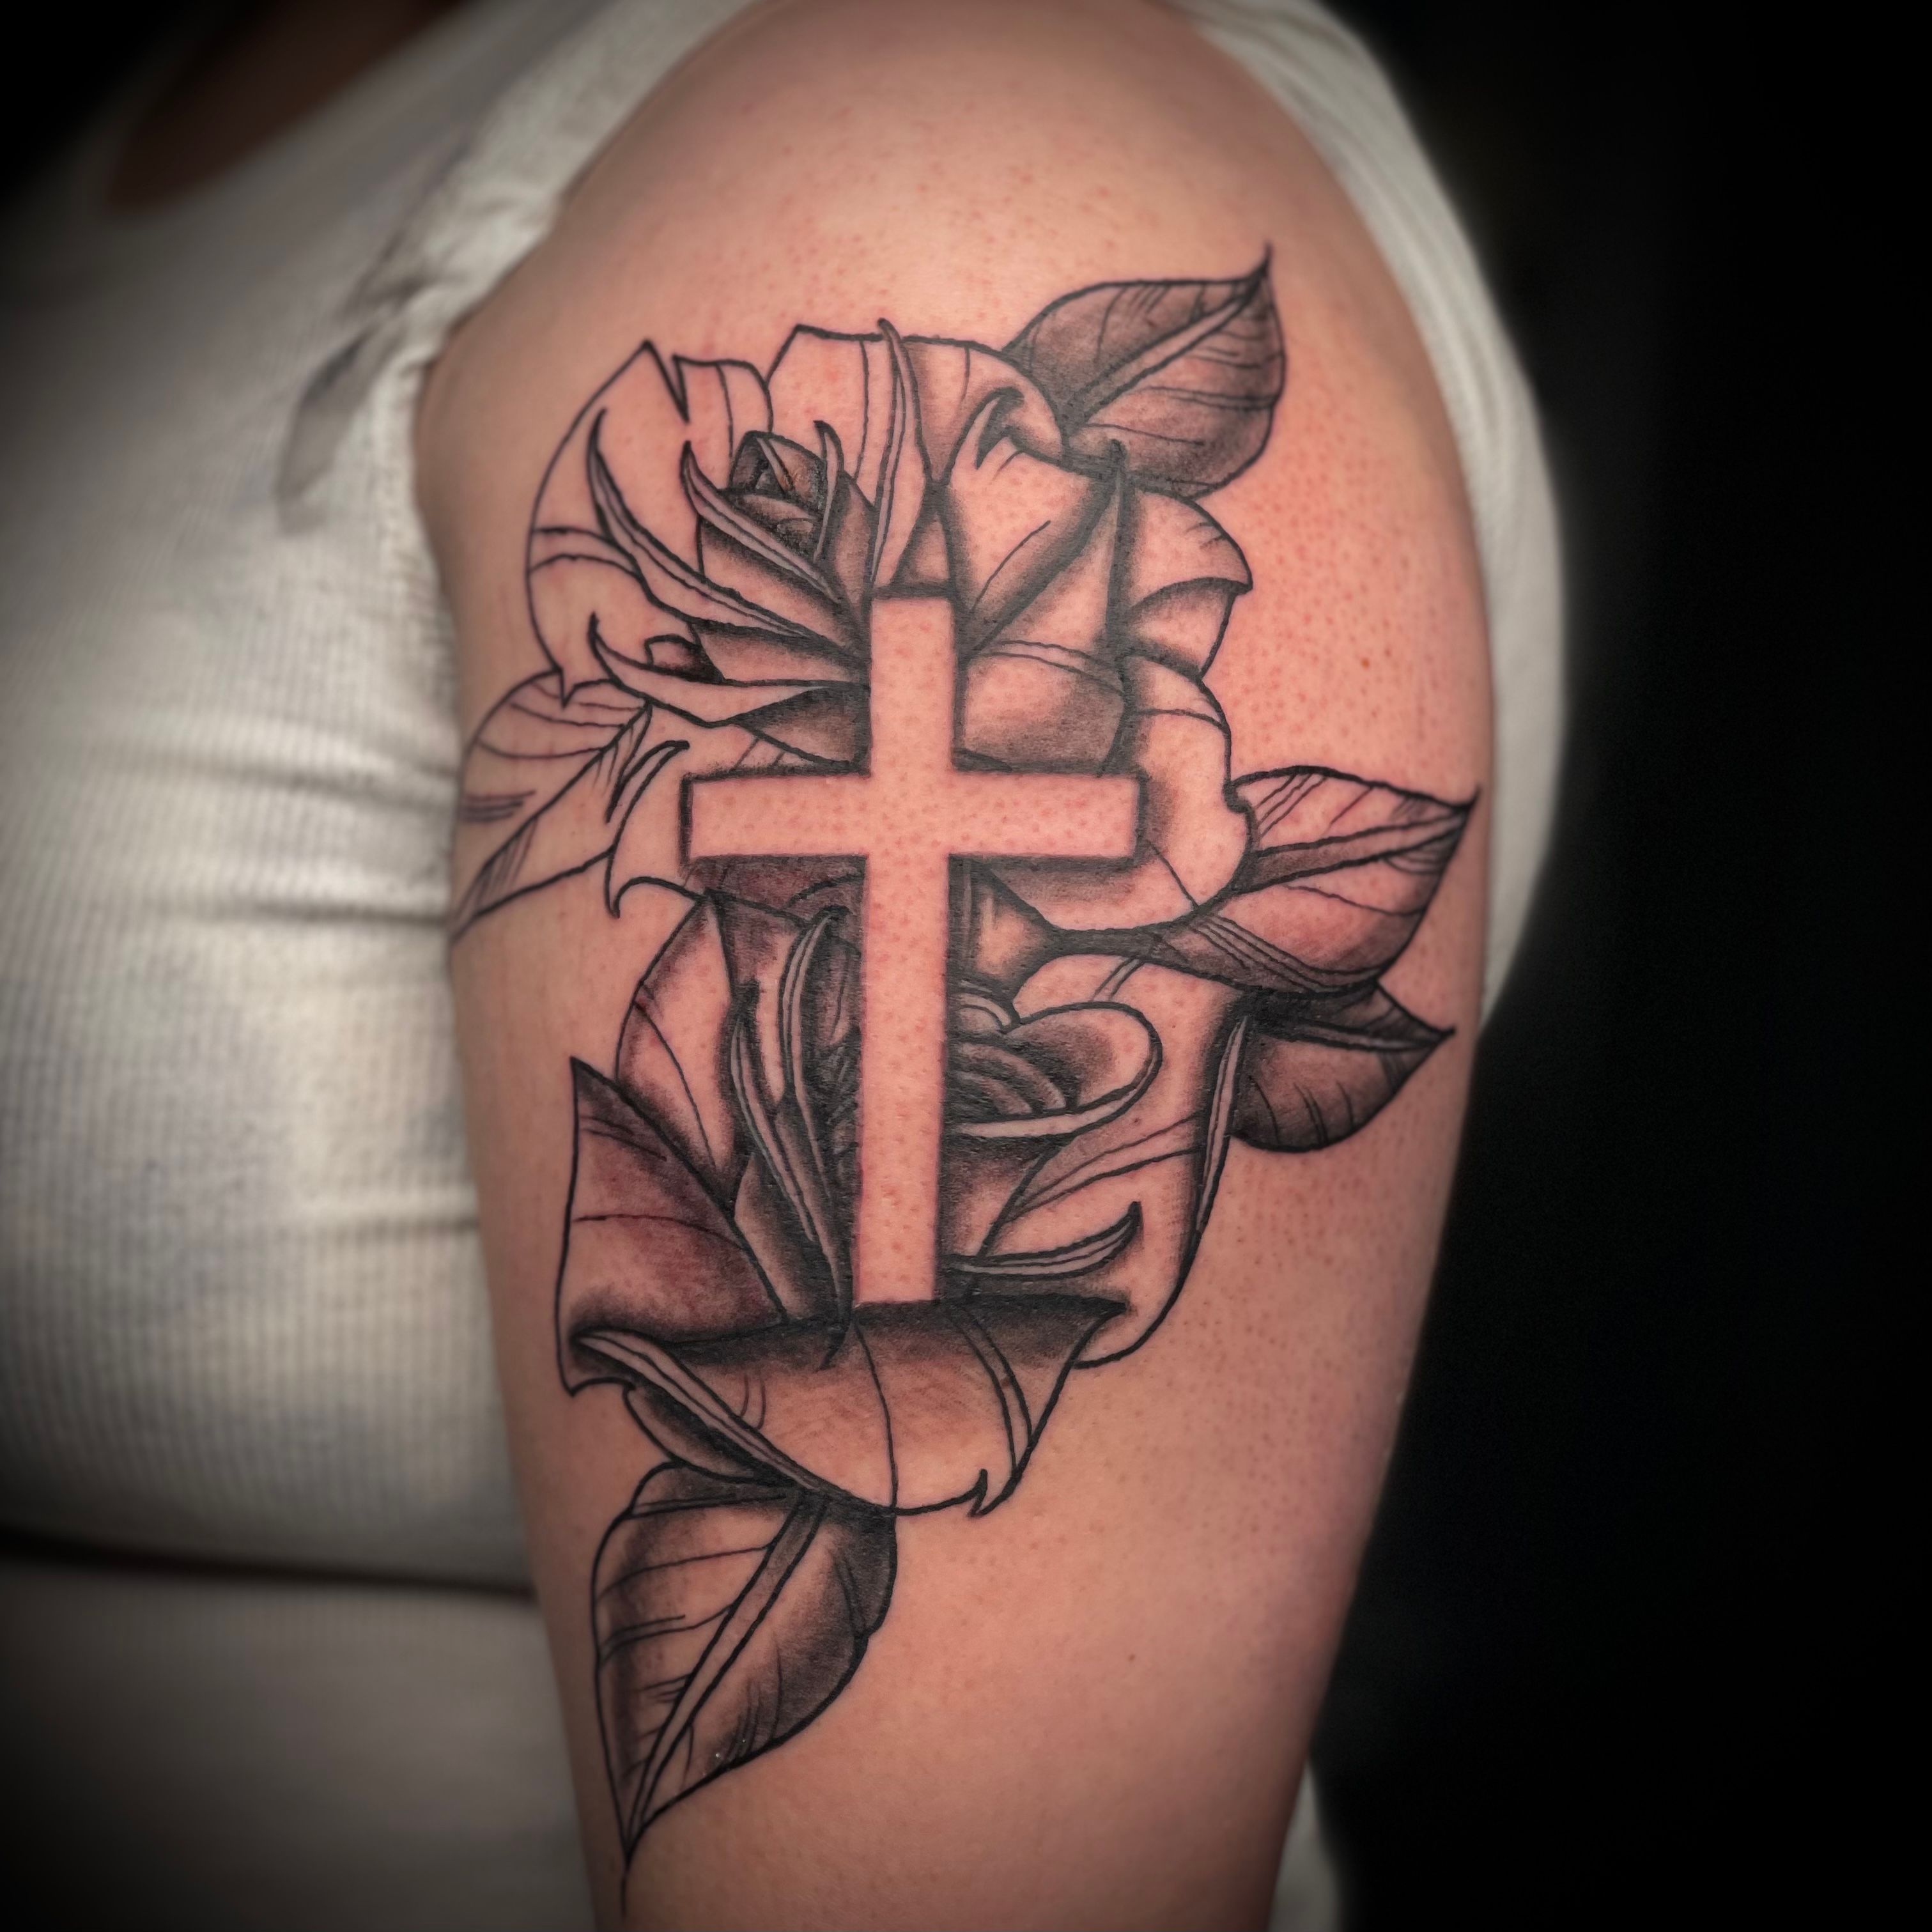 Share 97 about cross with flowers inside tattoo unmissable  indaotaonec